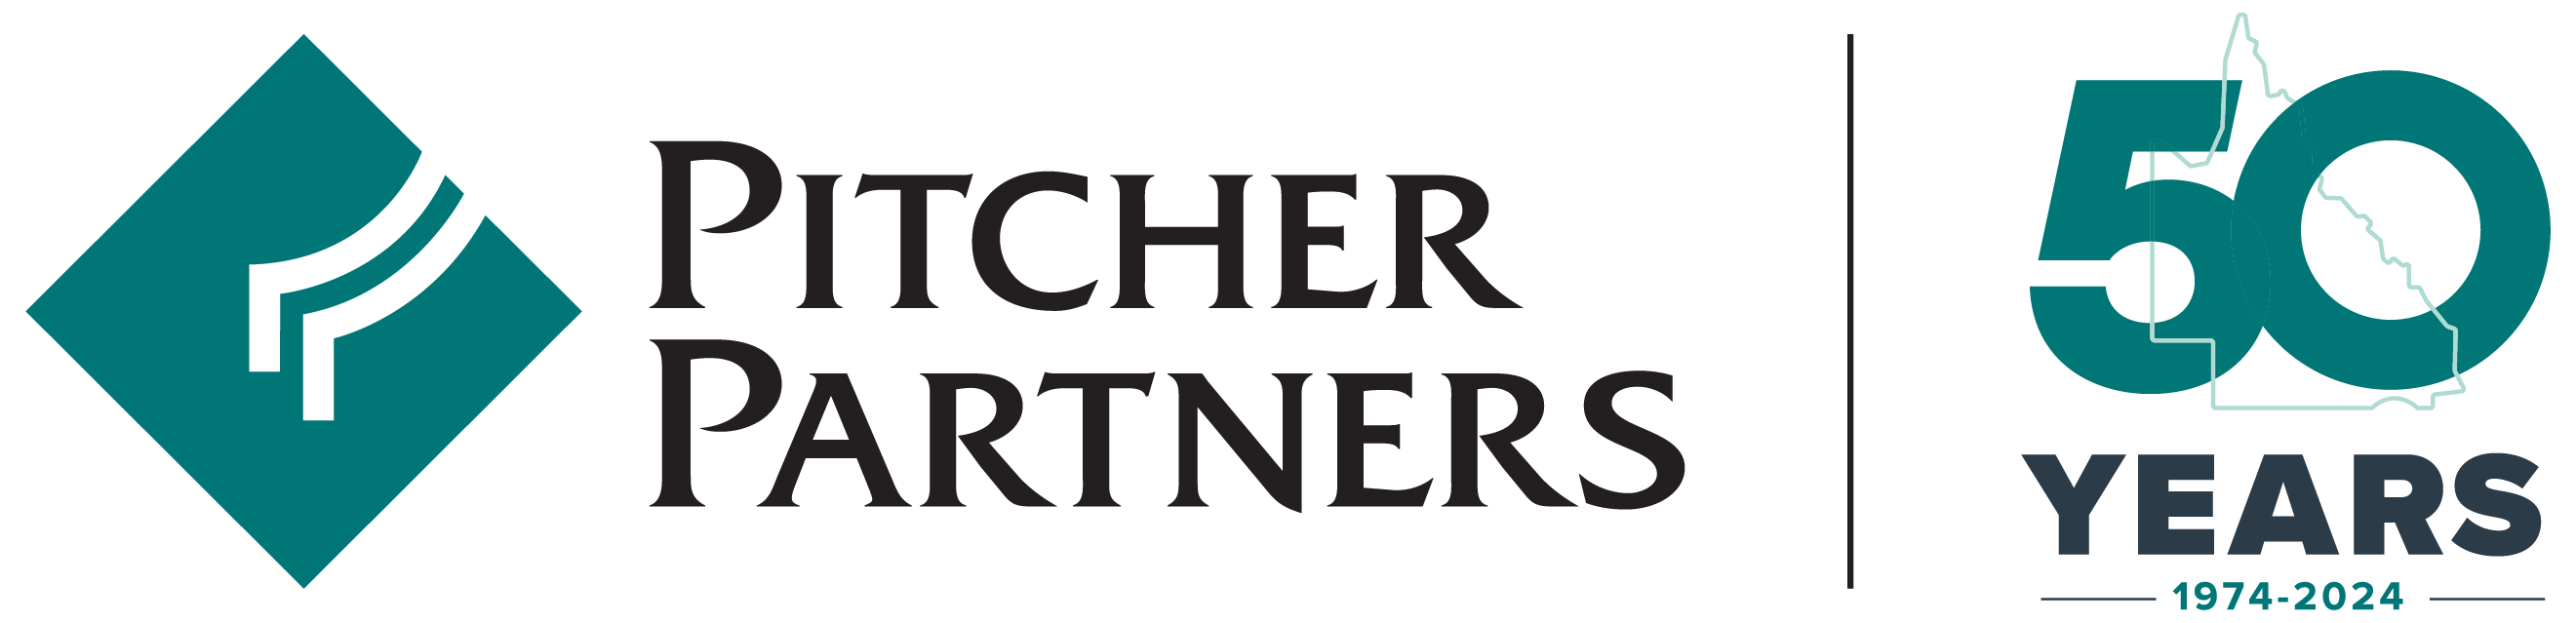 Pitcher Partners 50 Years